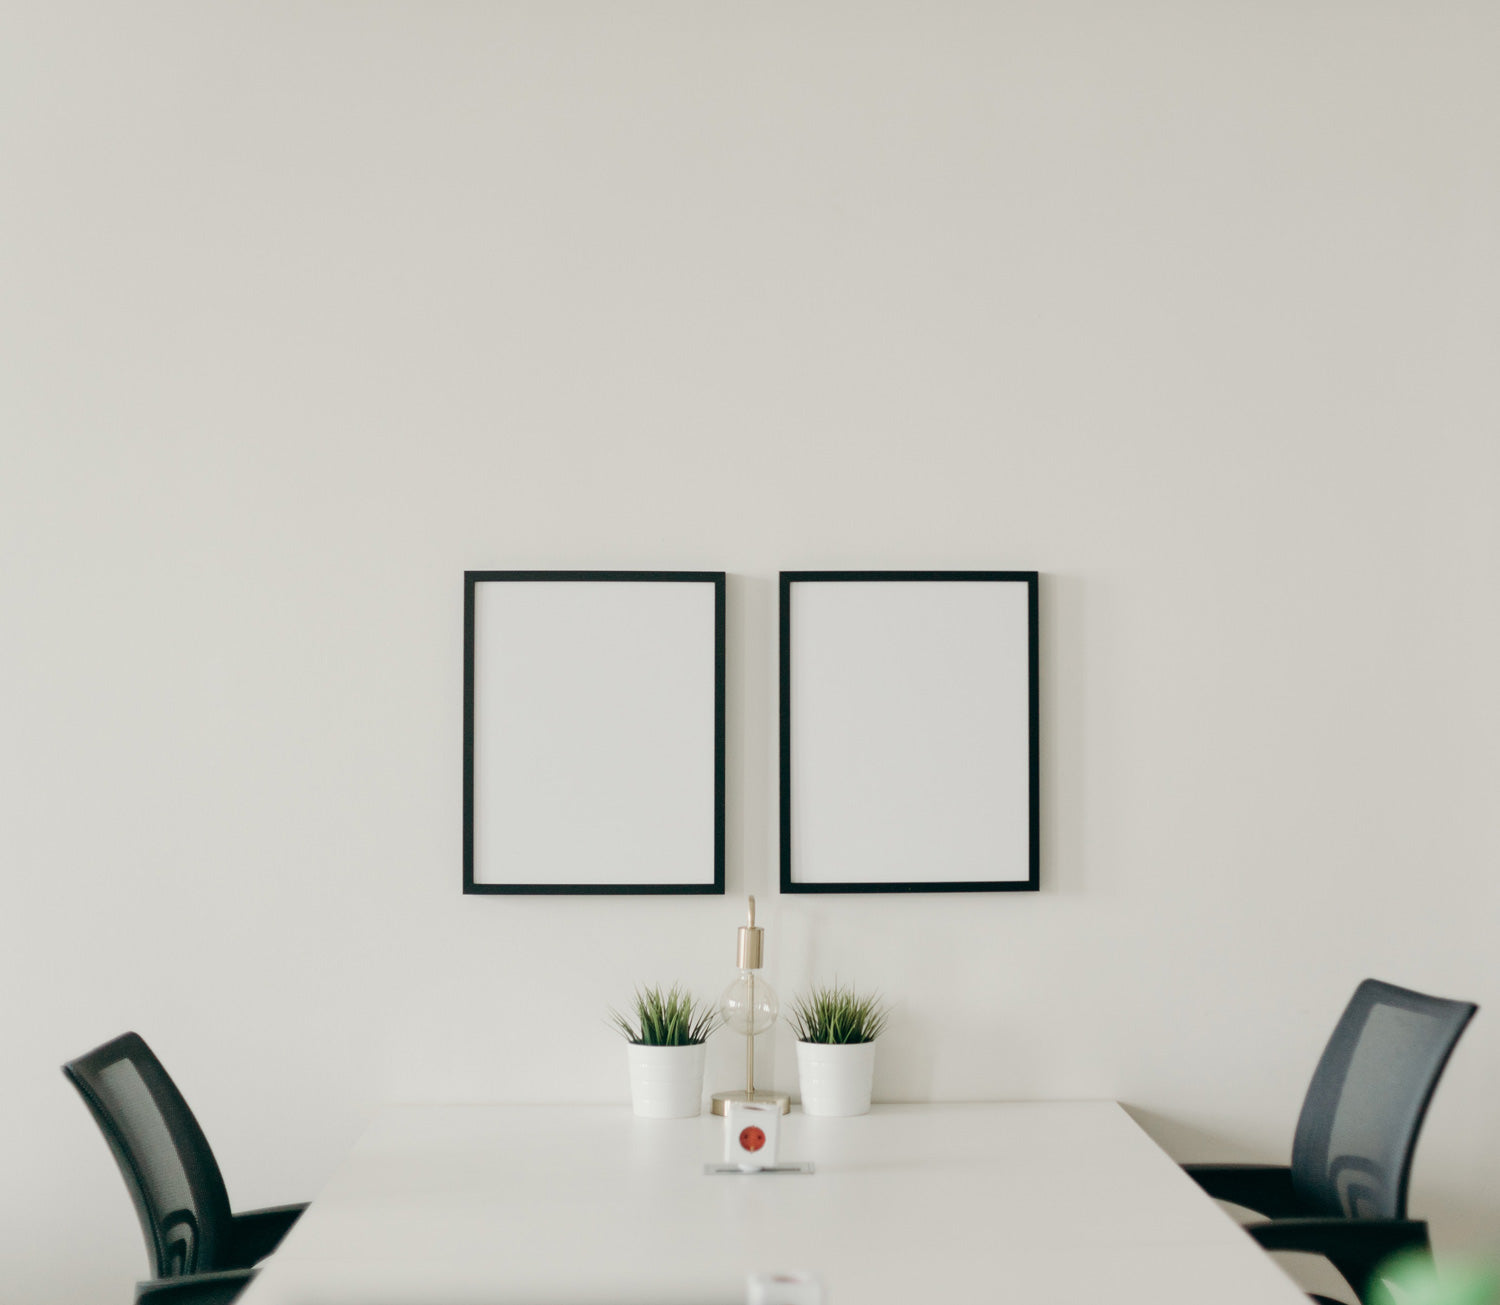 How to create a minimalist office setup and get the most out of it.